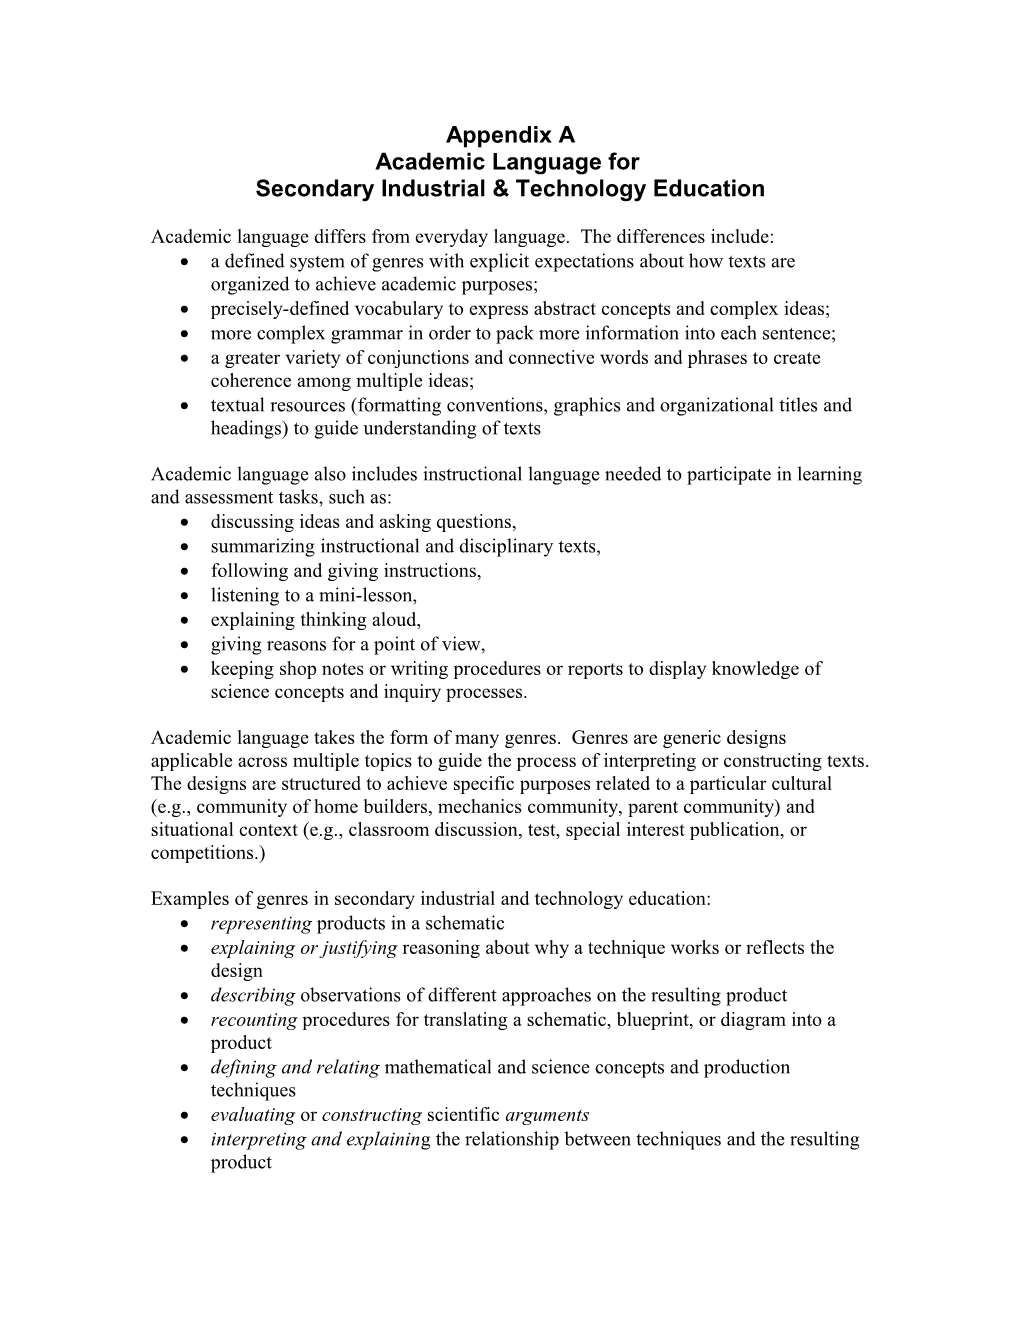 Secondary Industrial & Technology Education